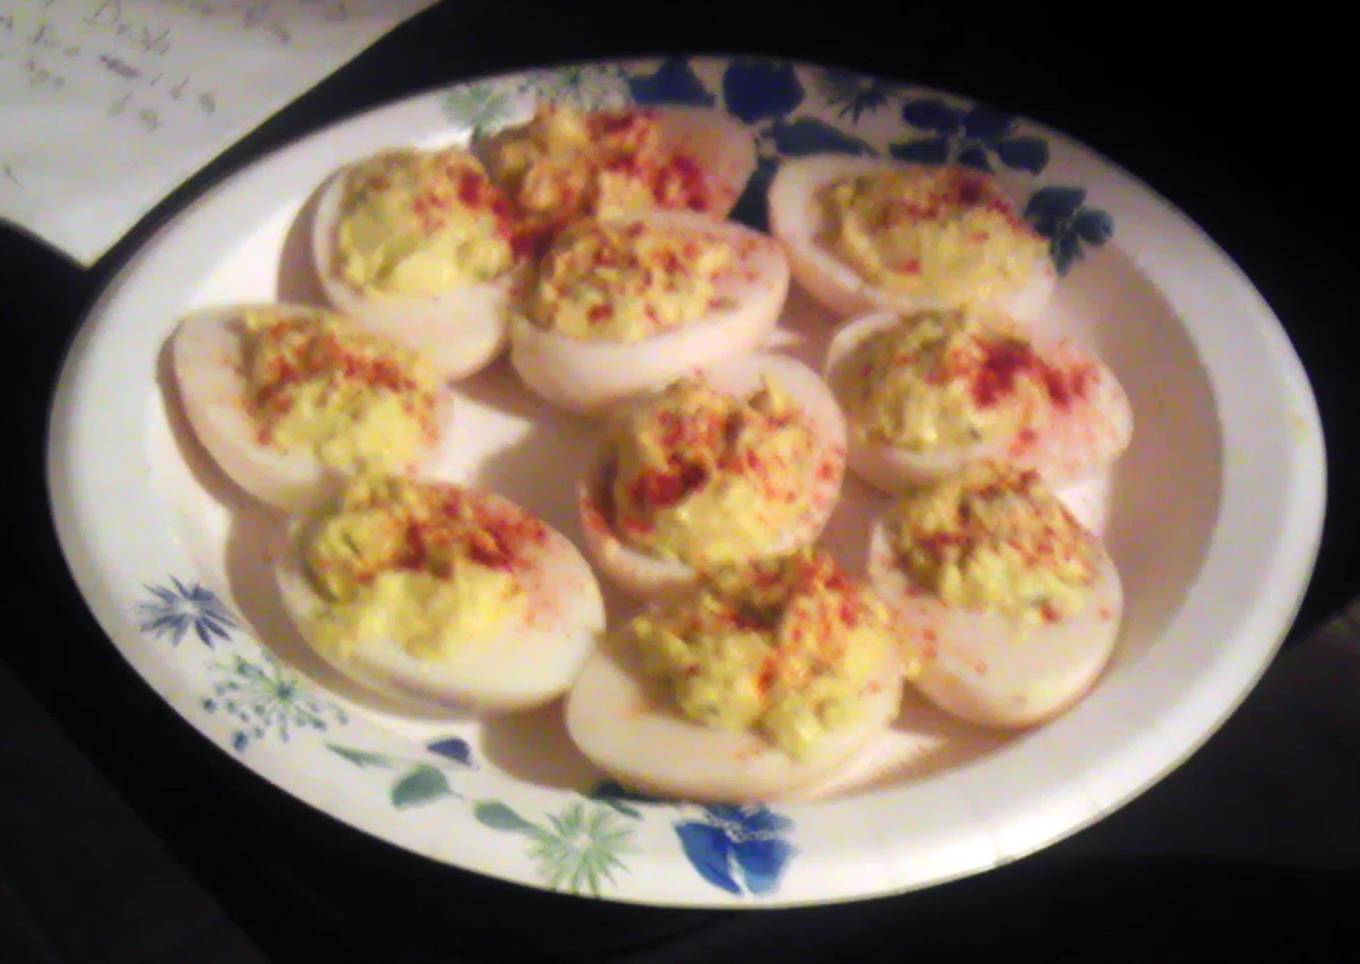 My wifes deviled eggs